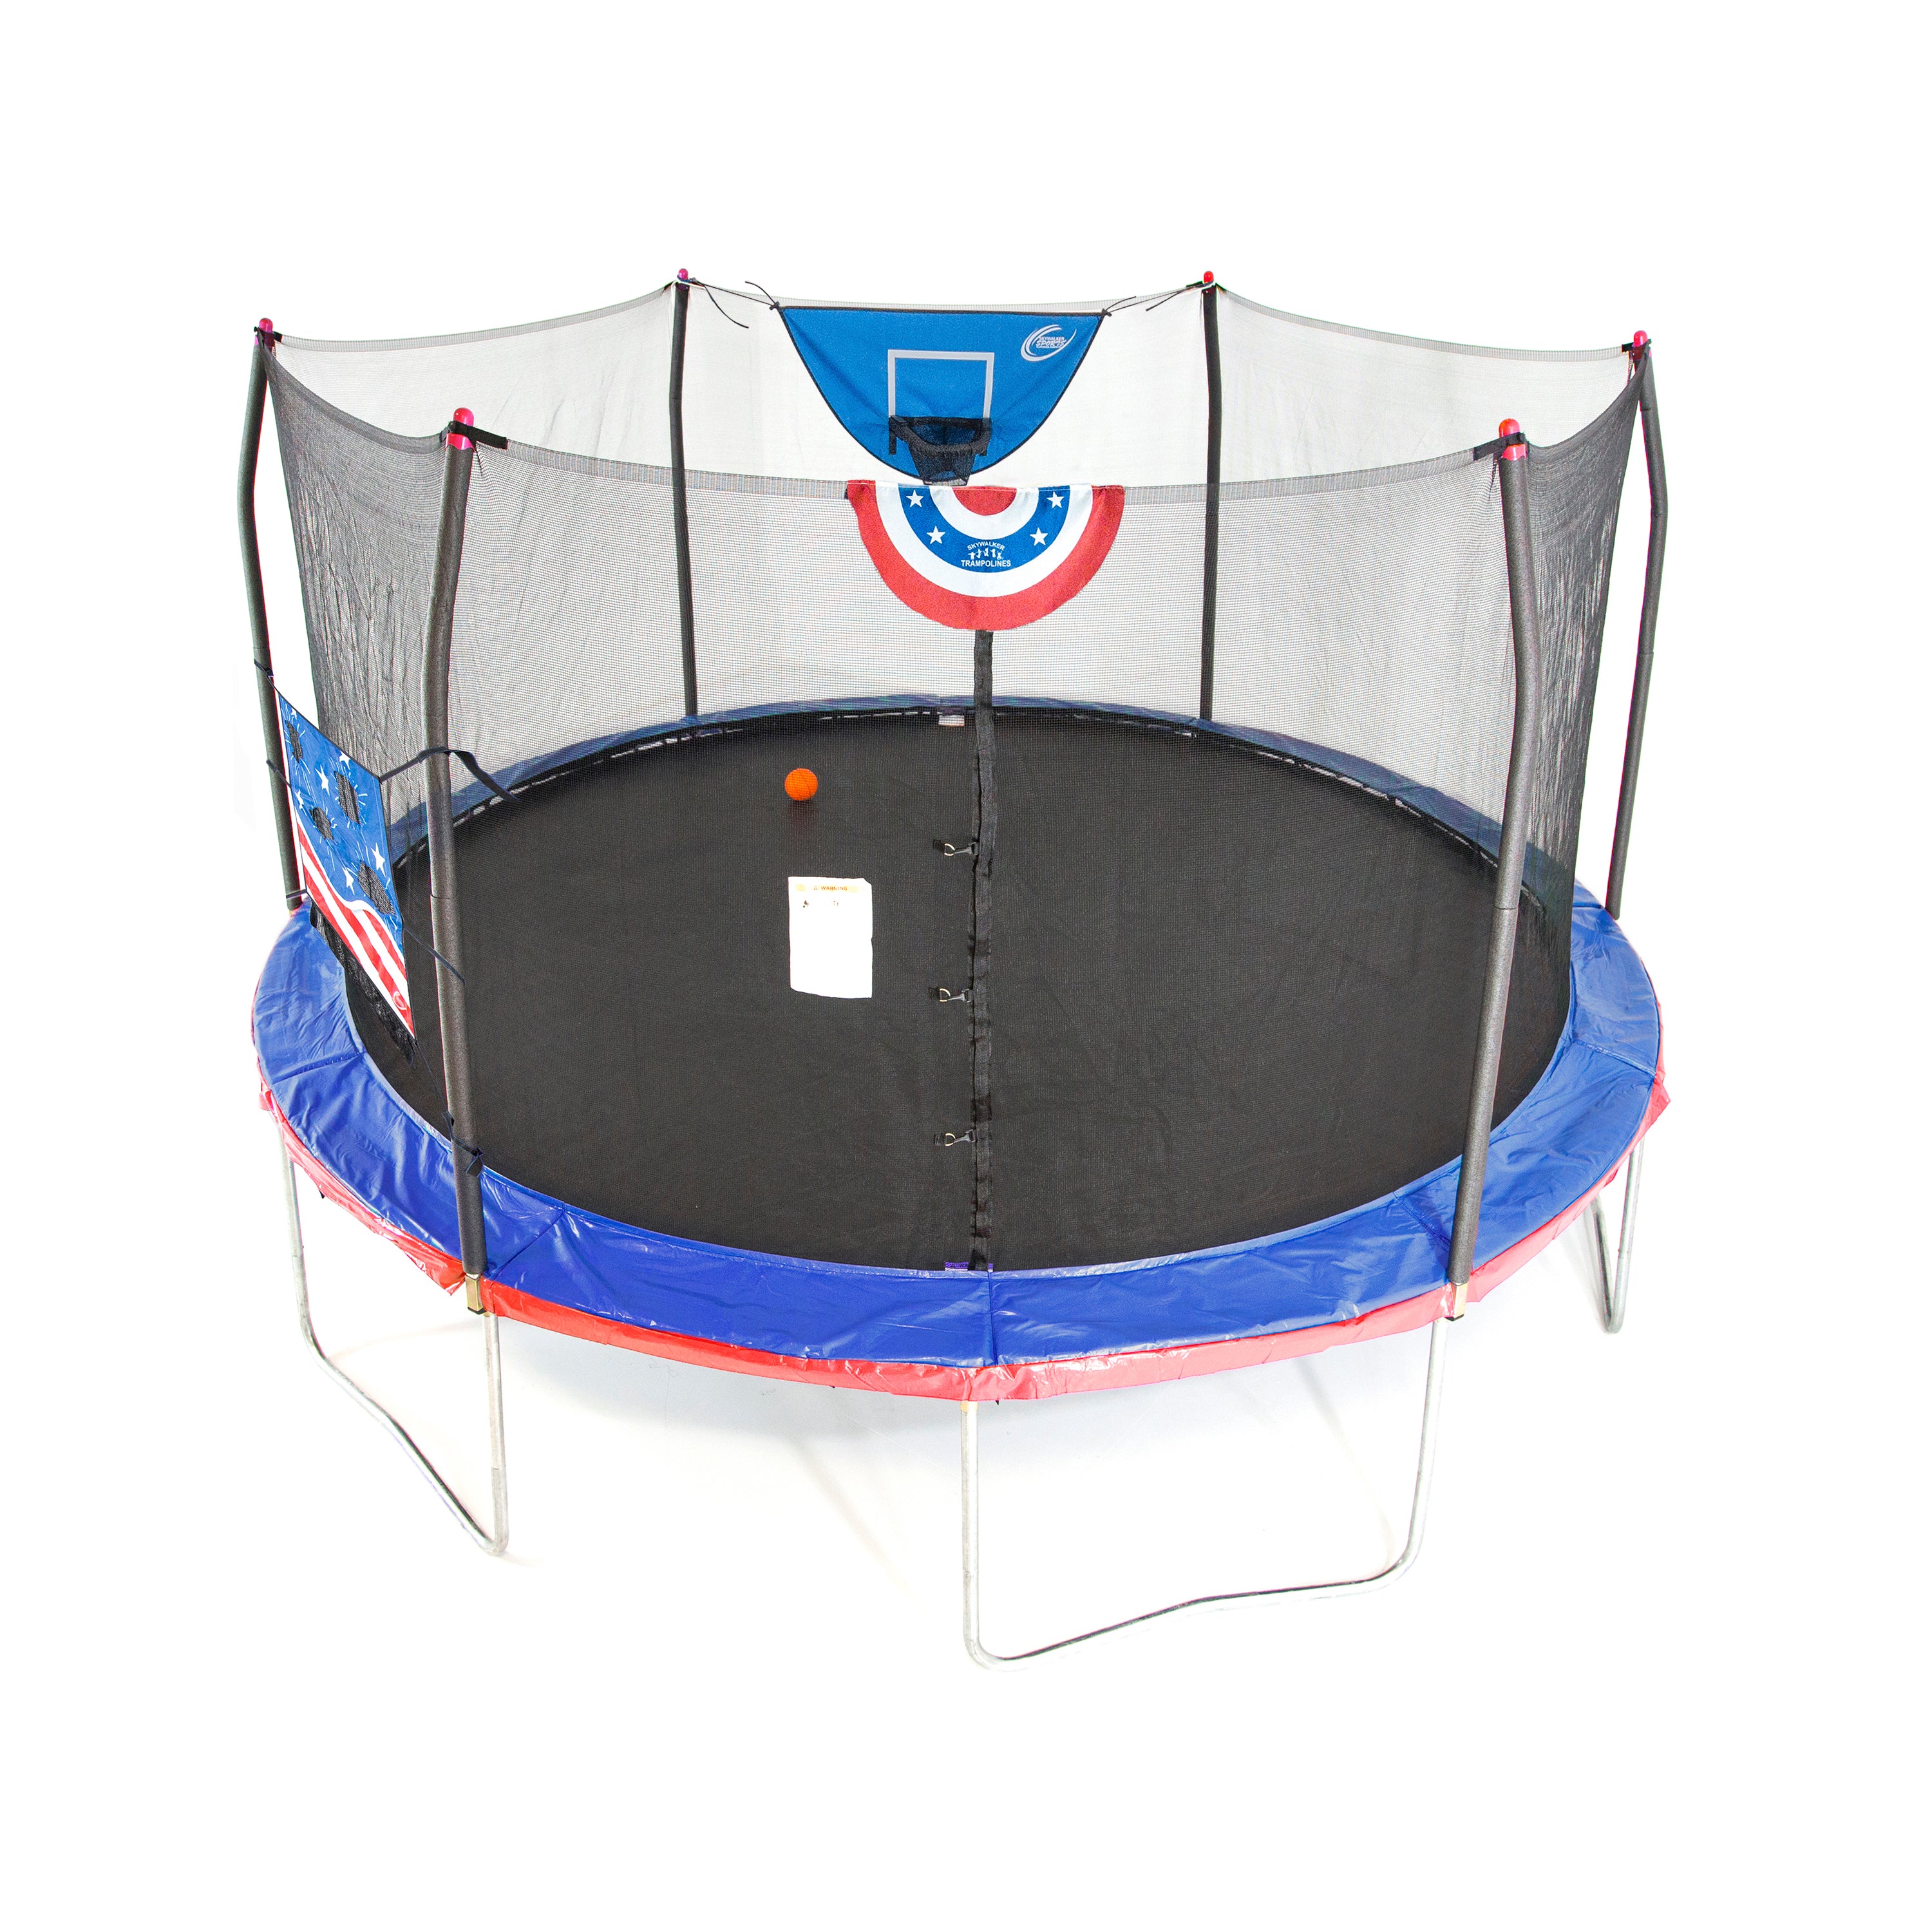 15-foot round trampoline with blue and red spring pad, blue basketball hoop, and patriotic toss game.